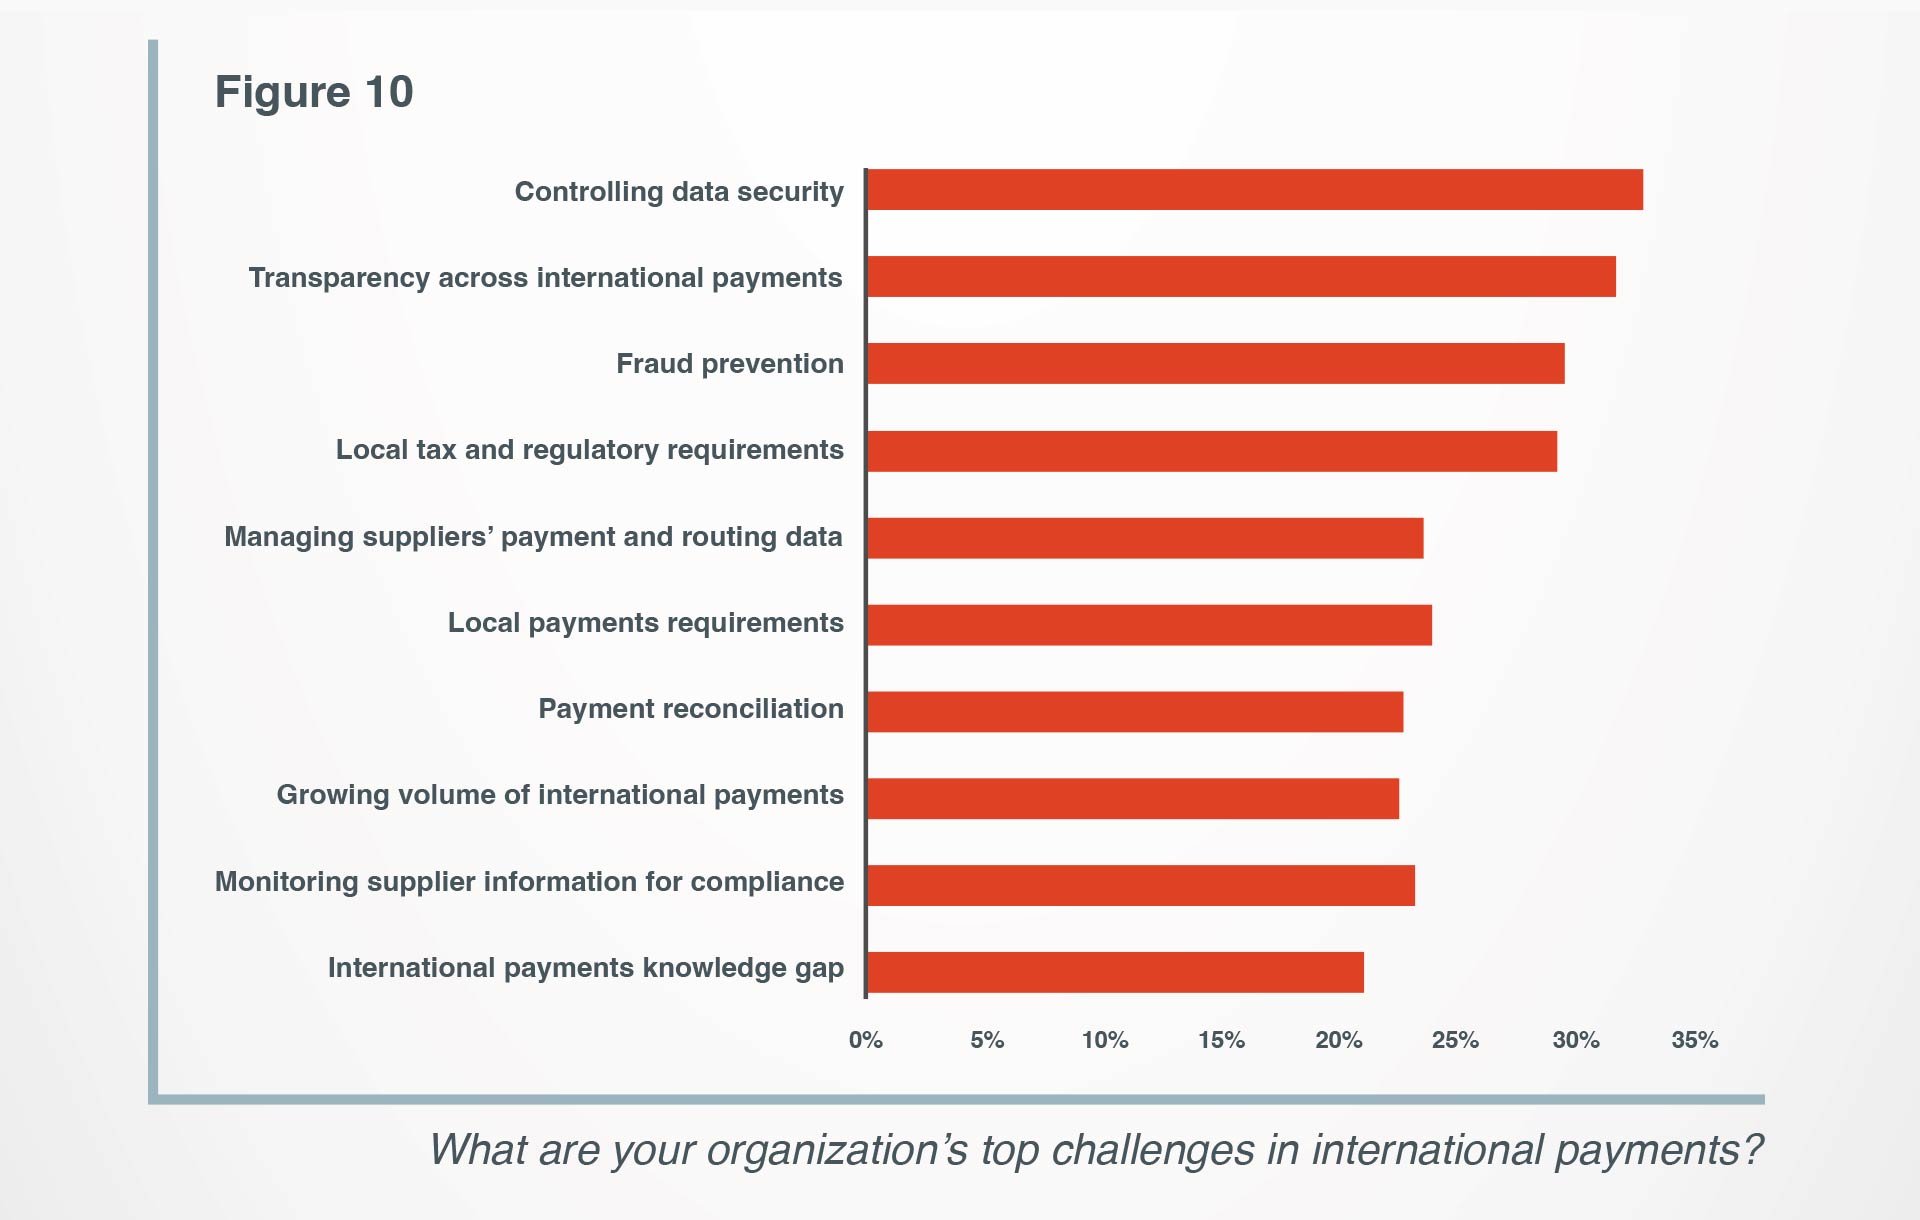 Respondents' top challenges in international payments